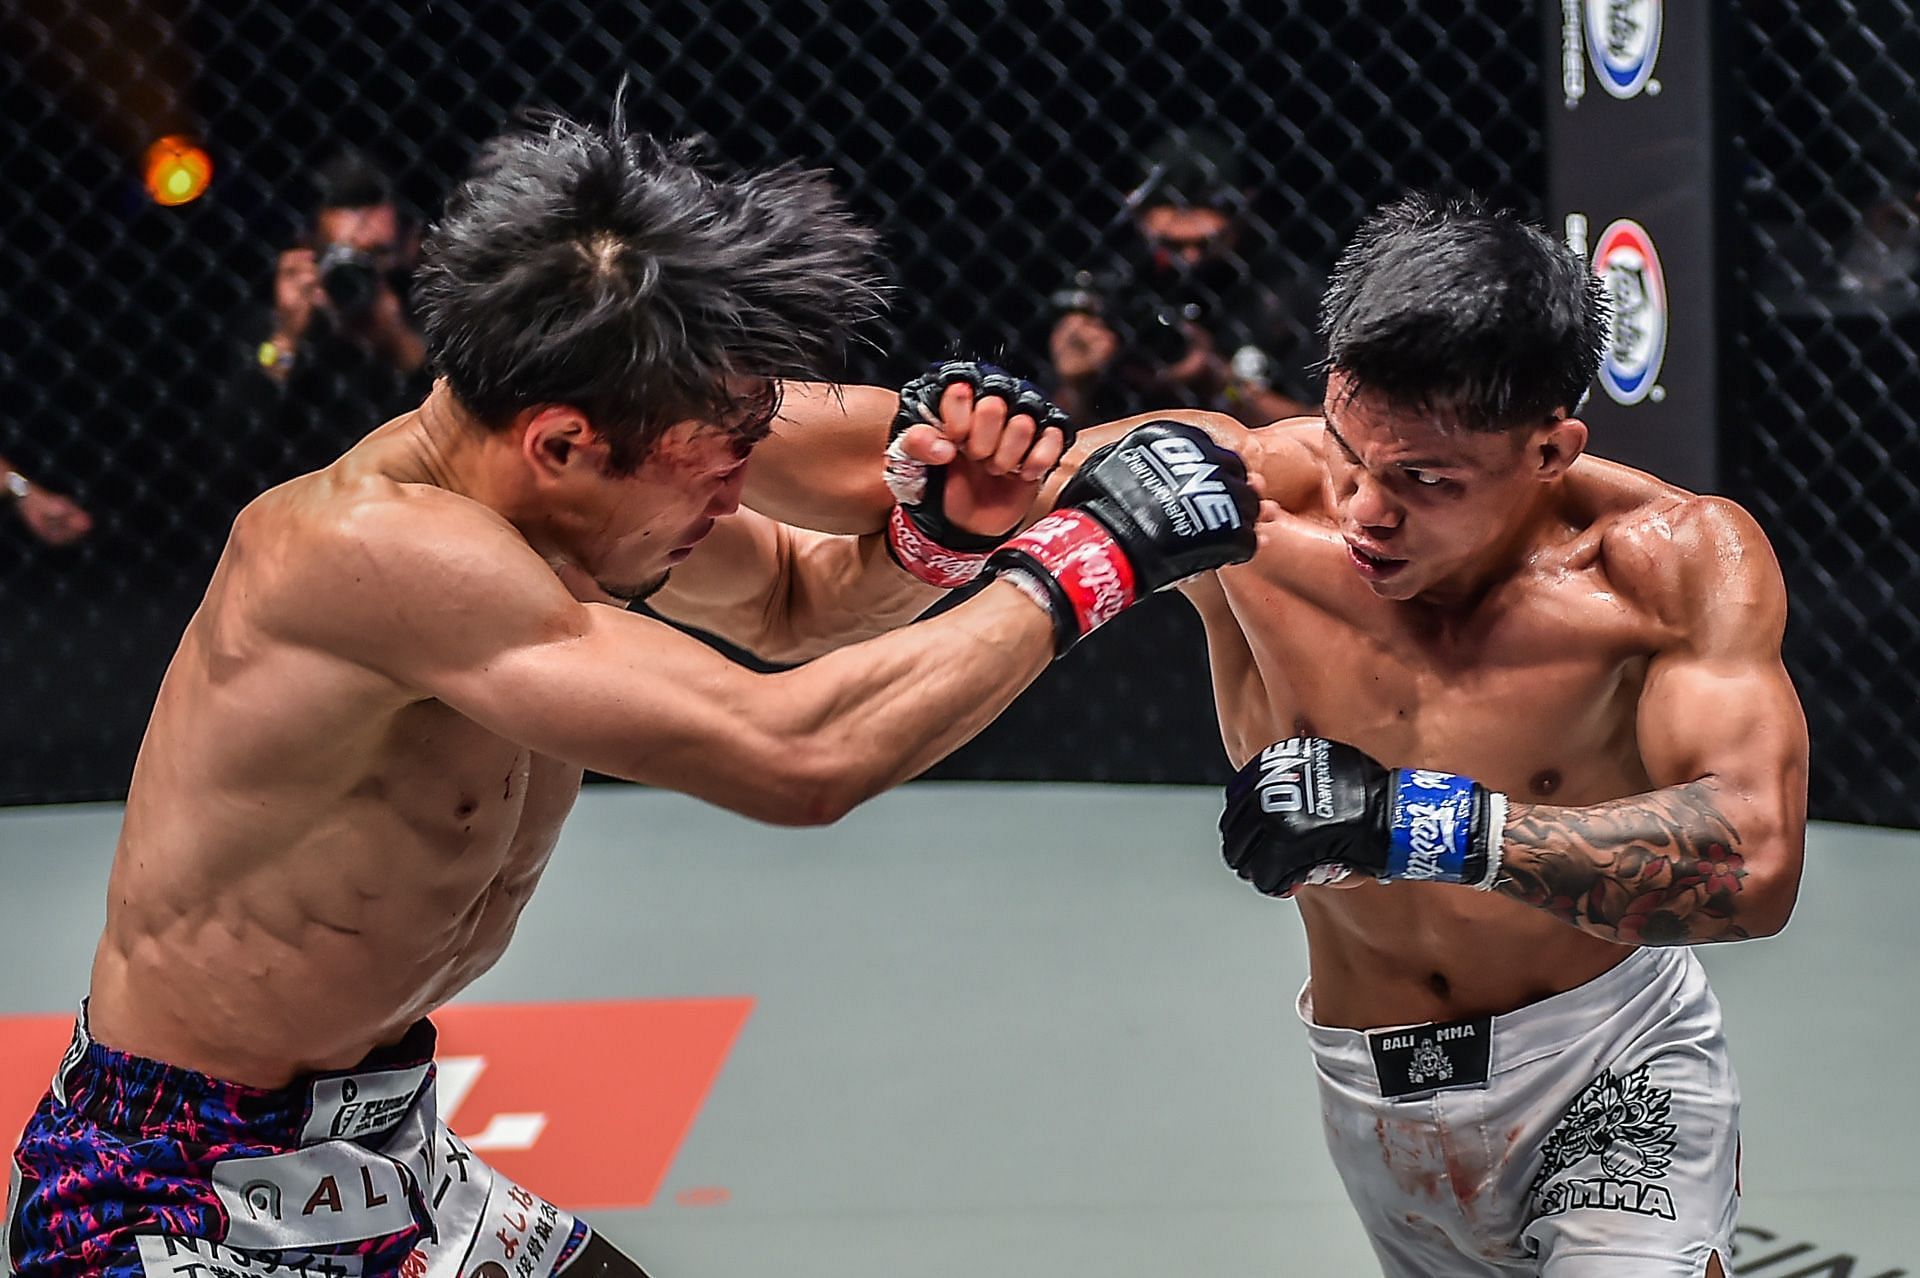 Elipitua reflects on his missed opportunities in his loss against Senzo Ikeda | Photo: ONE Championship